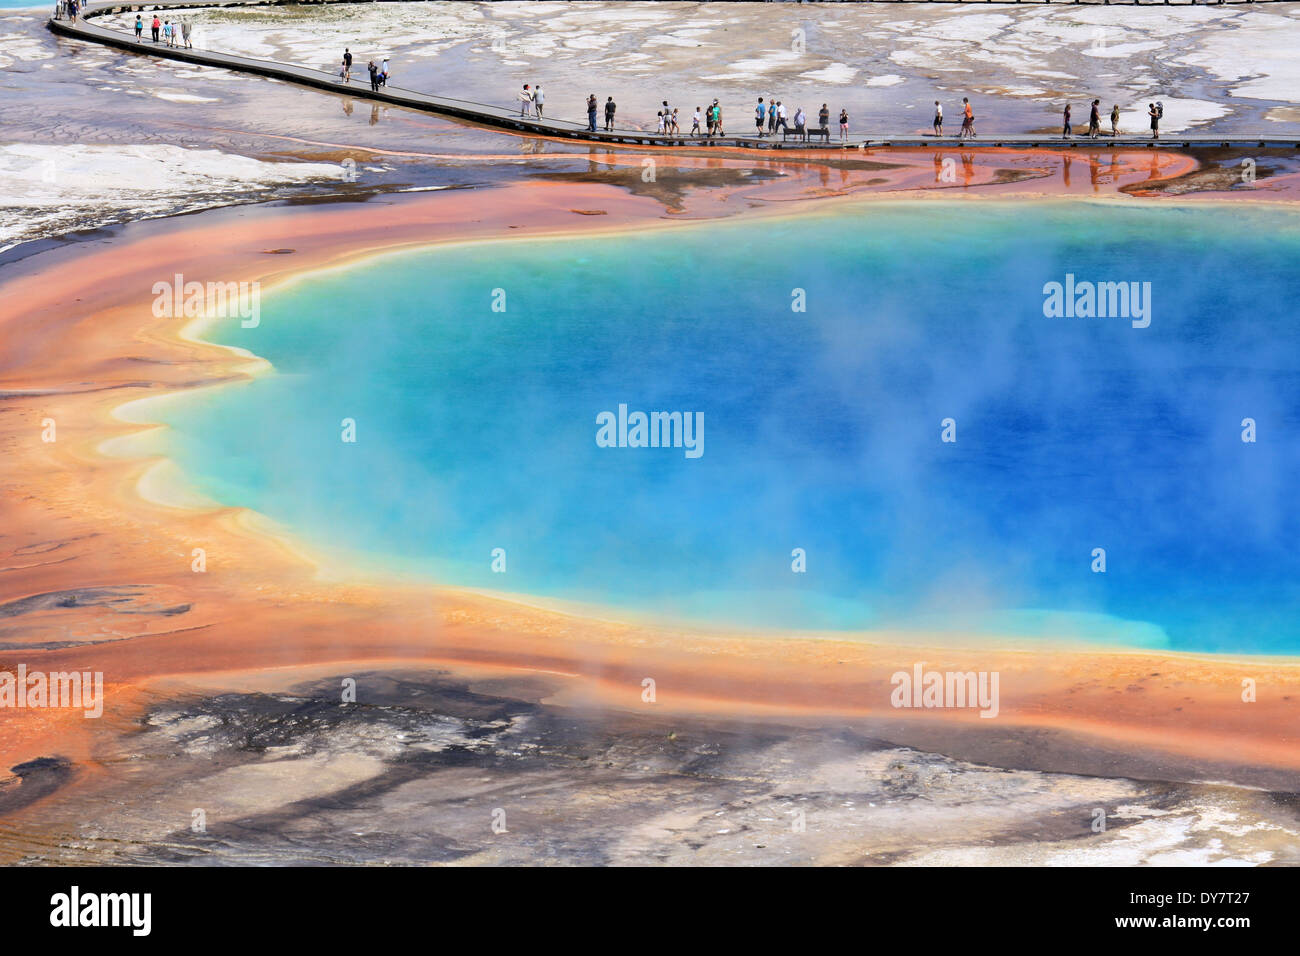 Aerial view of Grand prismatic spring, Yellowstone National Park, Wyoming, USA Stock Photo